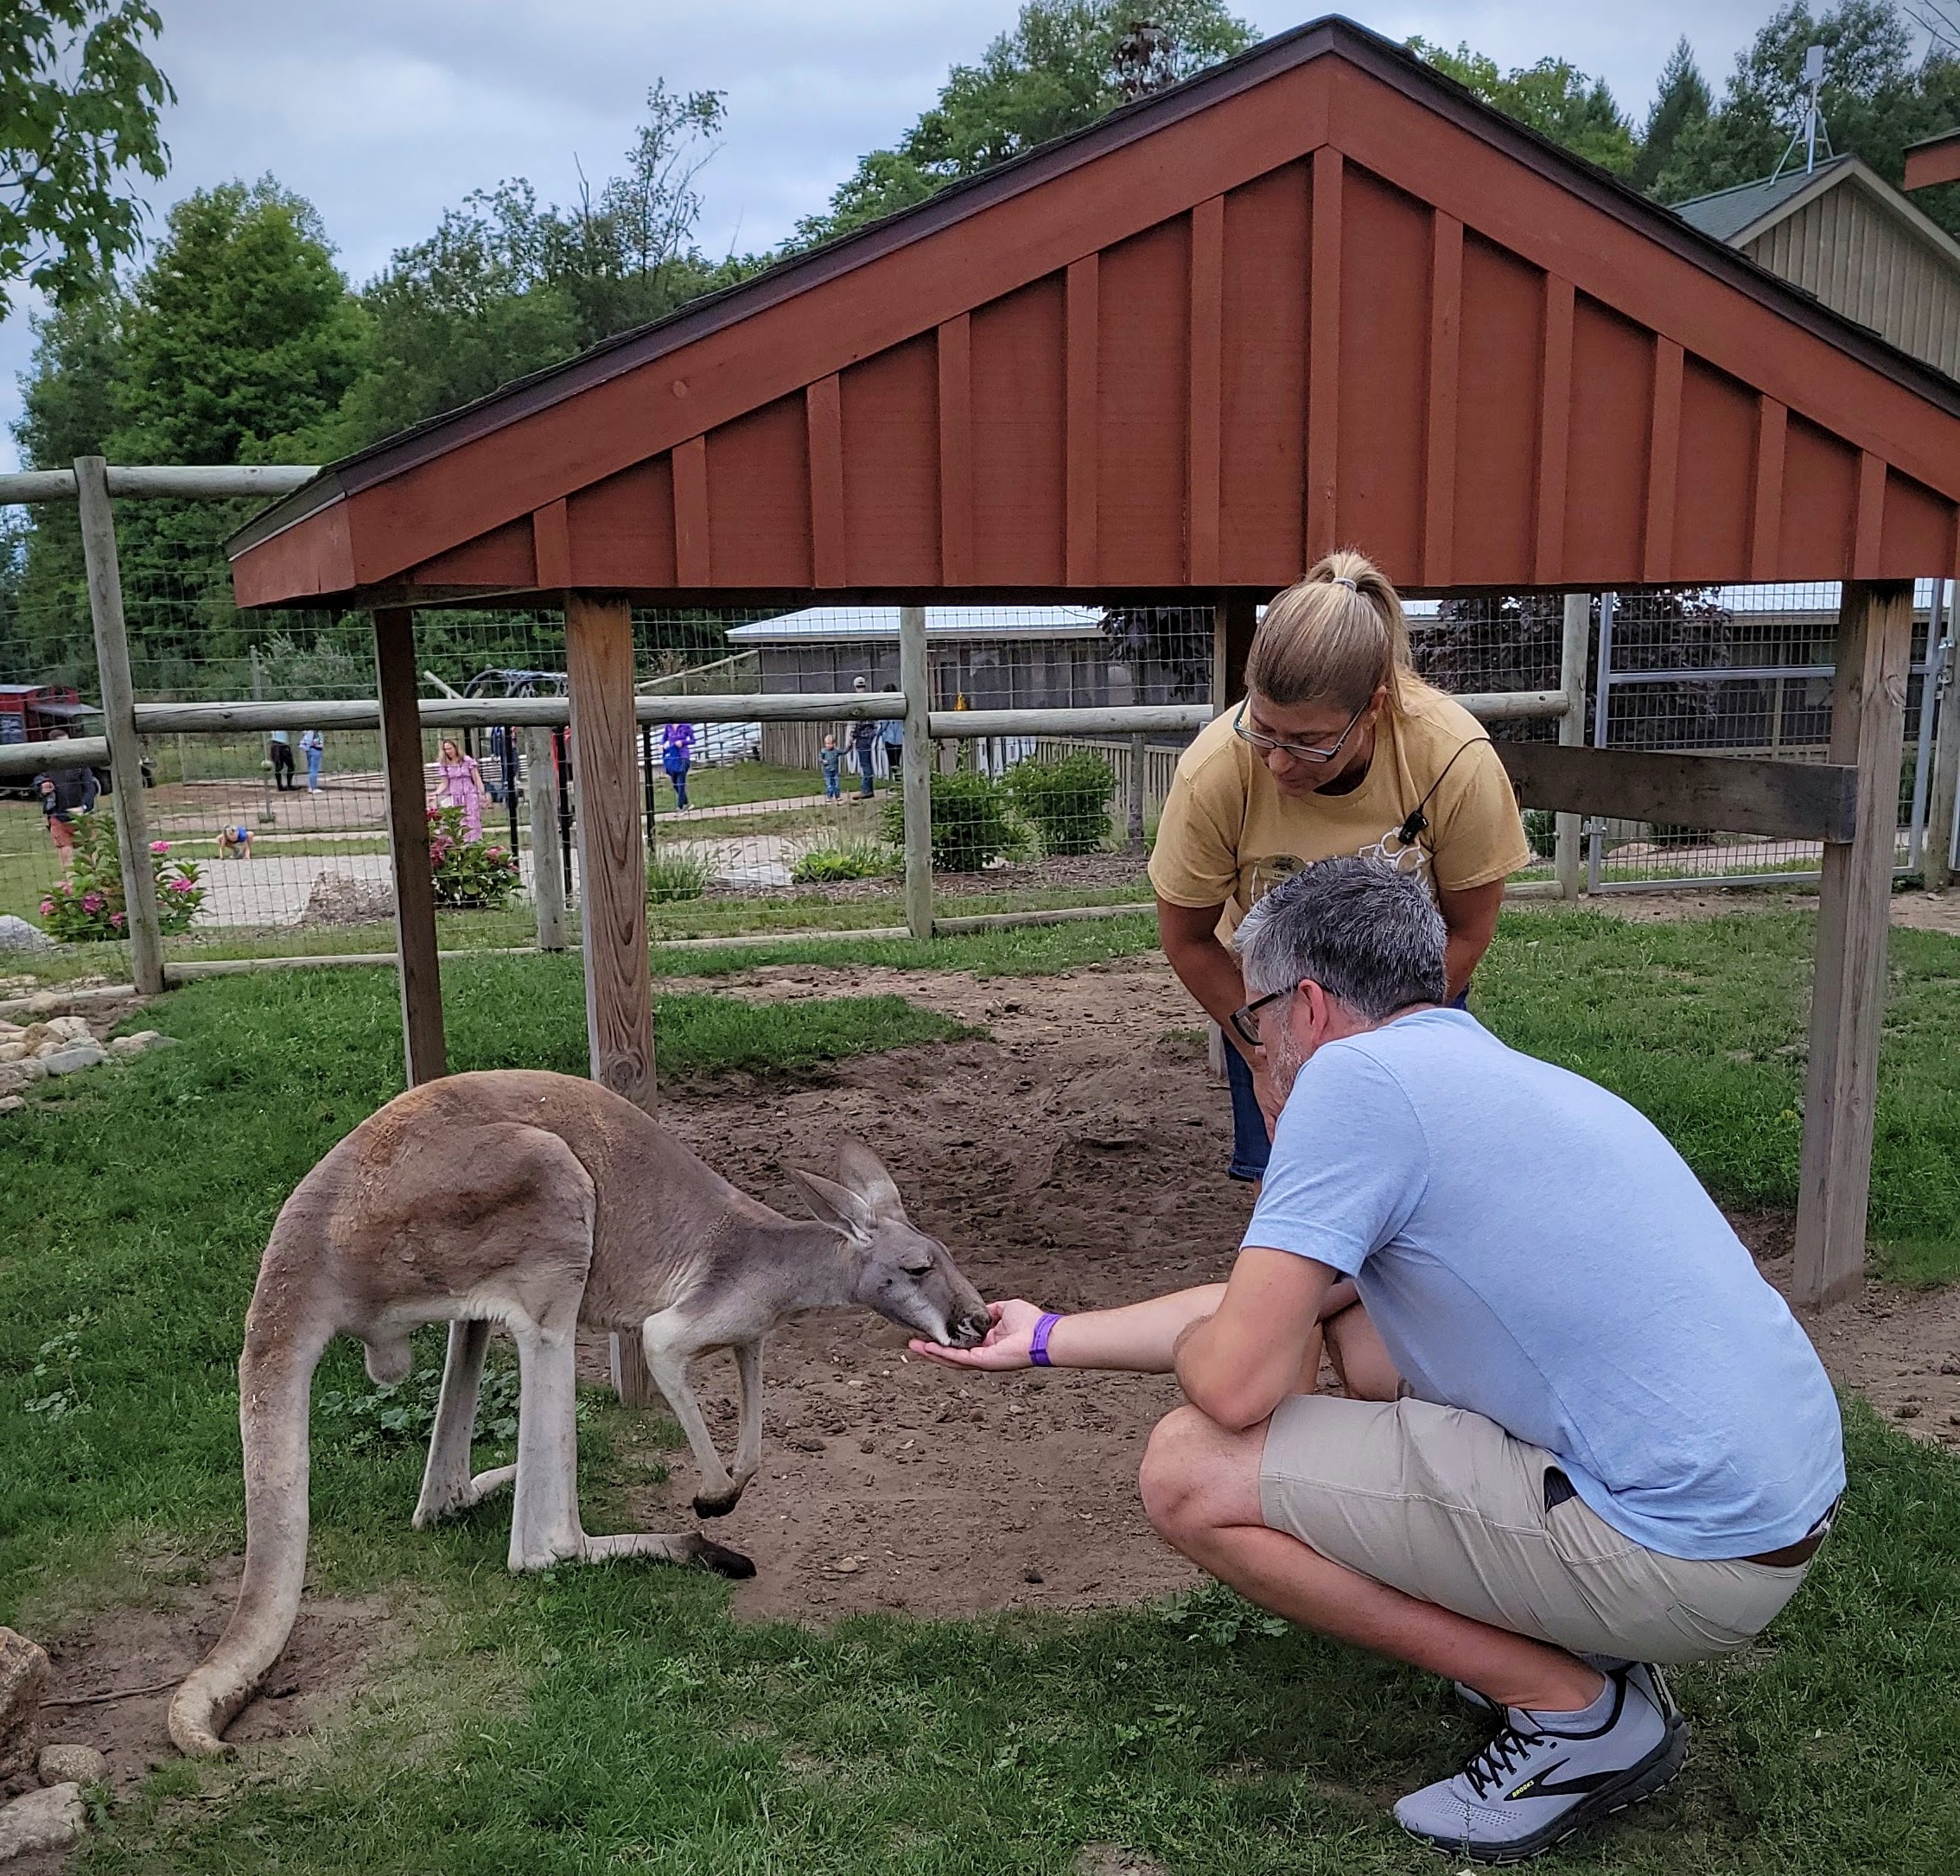 Lewis Adventure Farm & Zoo - Amazing Animal Encounters and Family Fun  (Photo Gallery) - Travel the Mitten